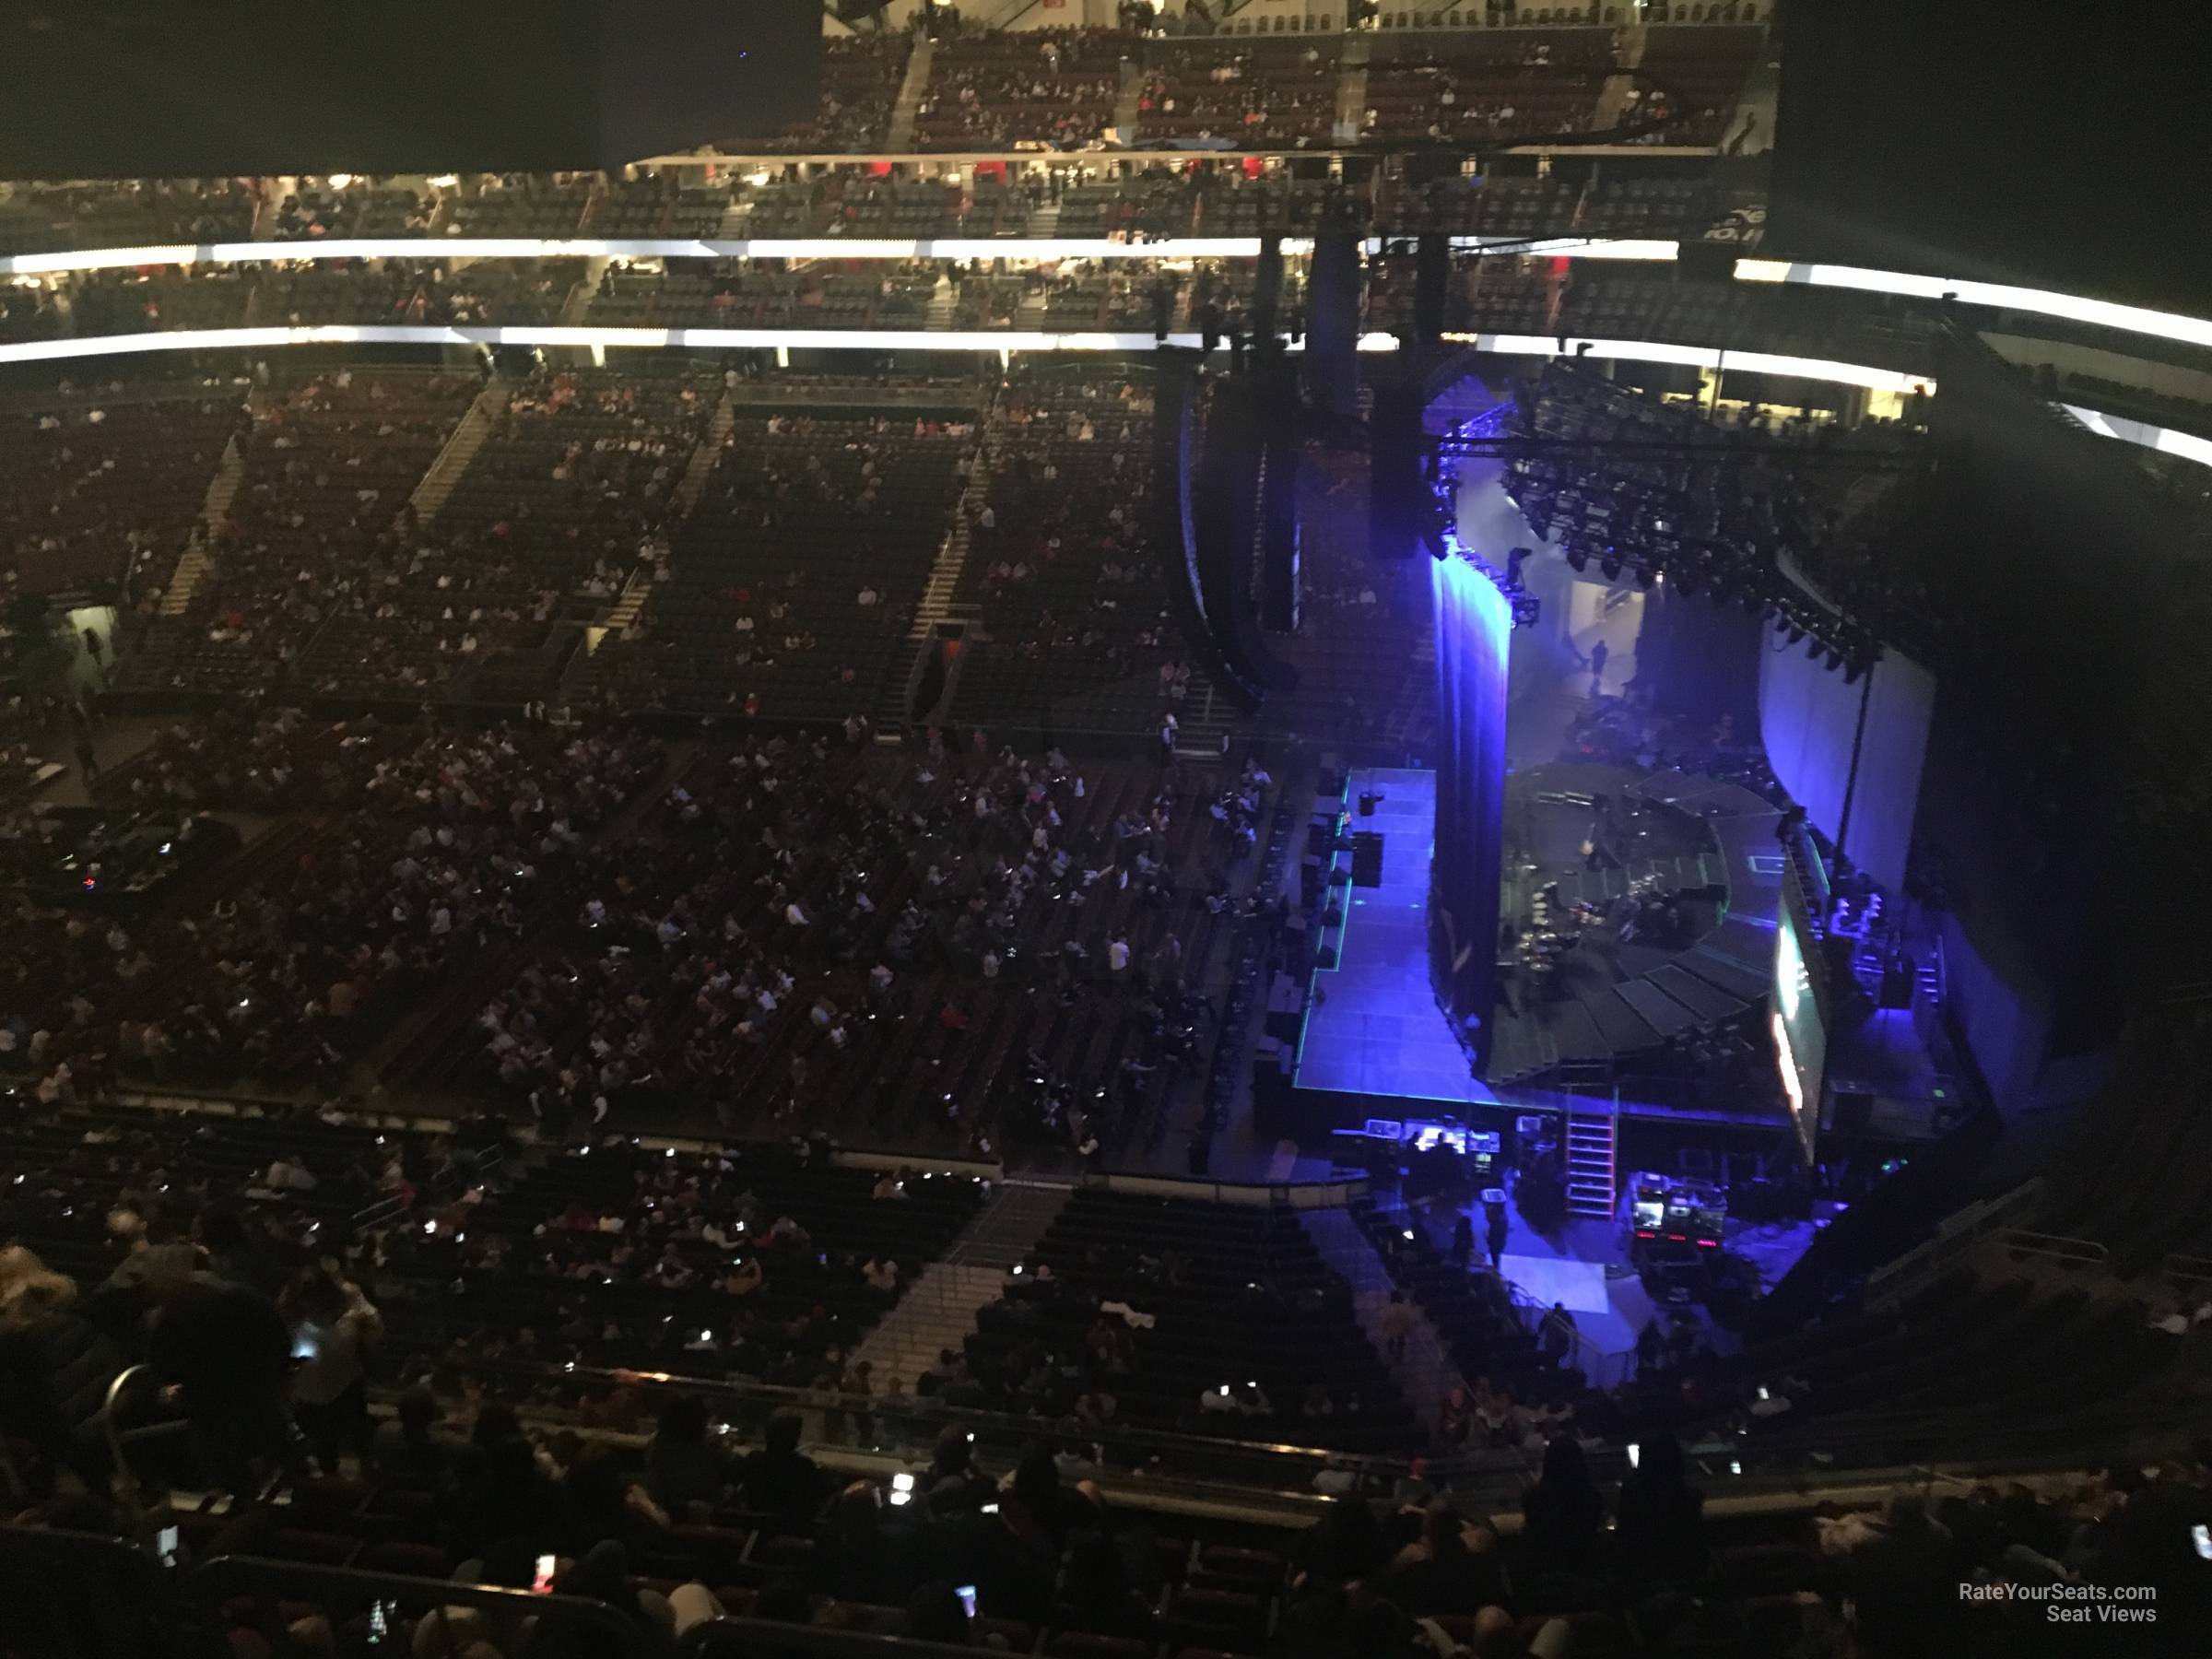 section 214, row 4 seat view  for concert - prudential center